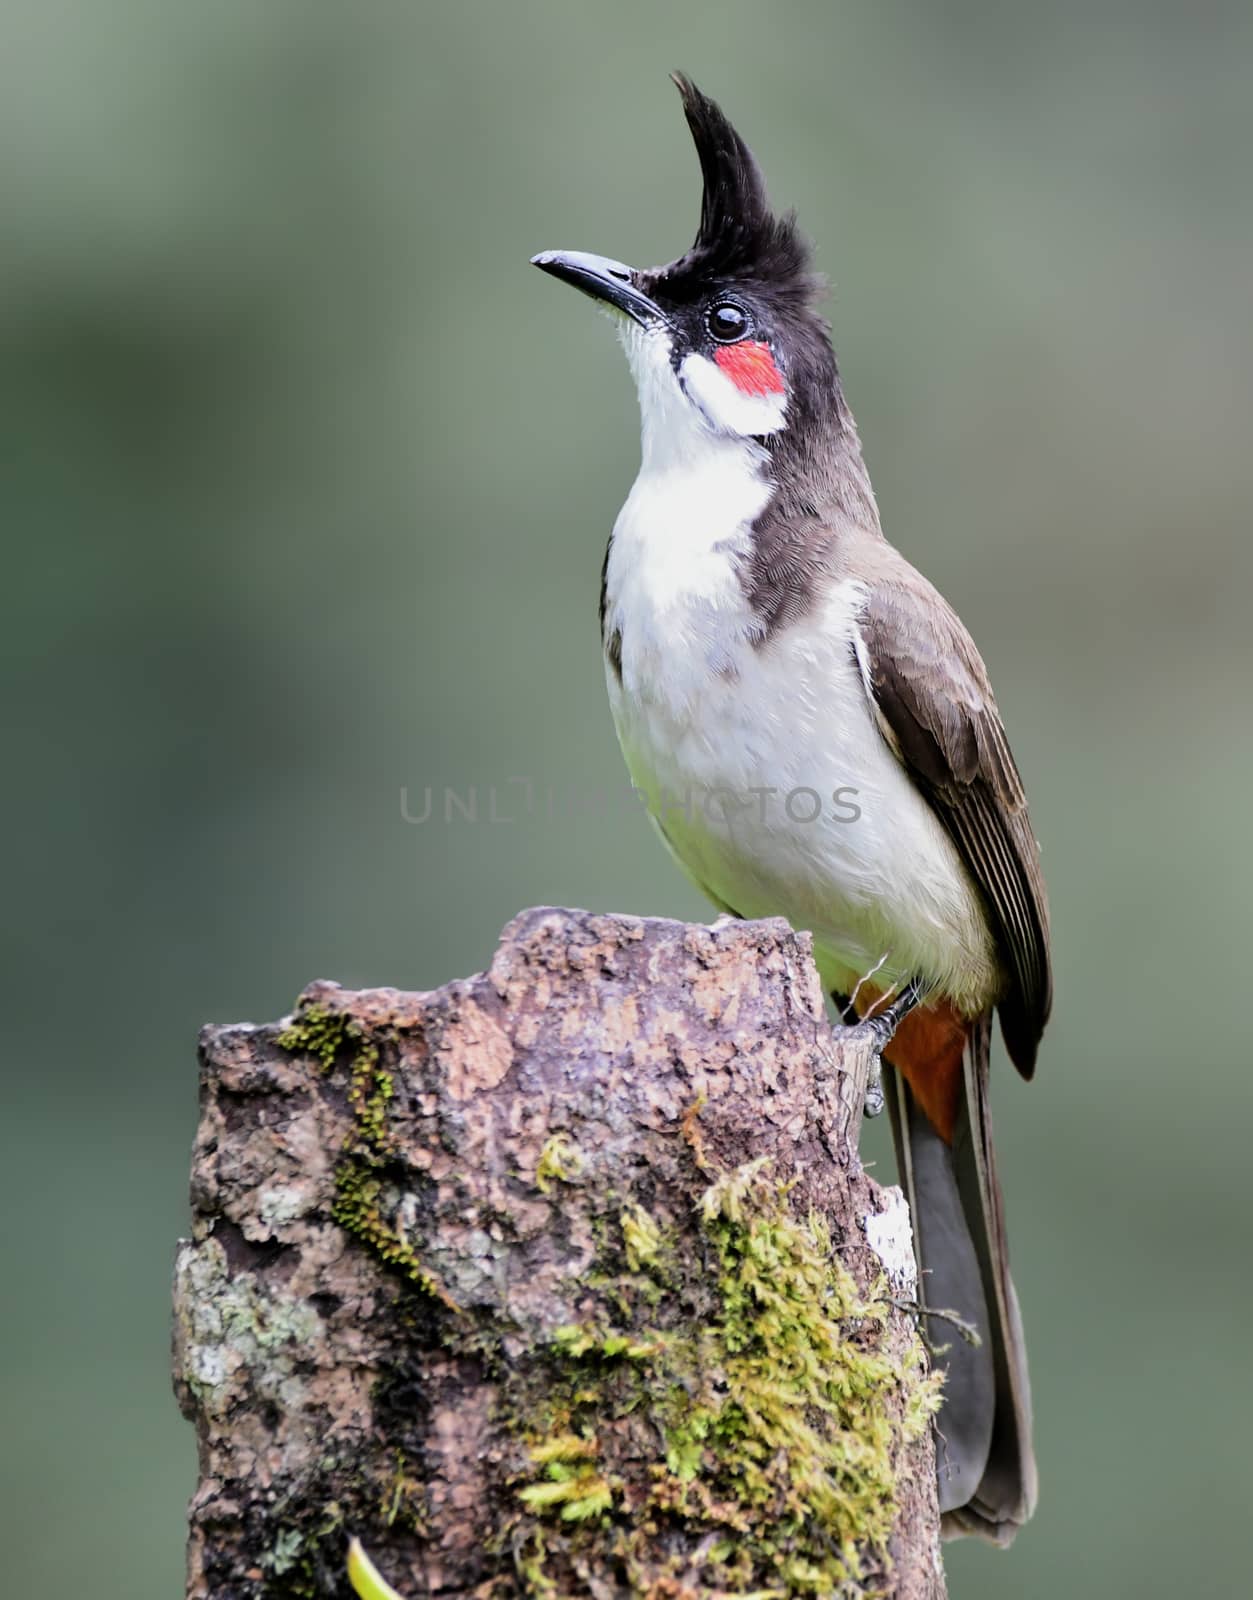 Red-whiskered bulbul by rkbalaji